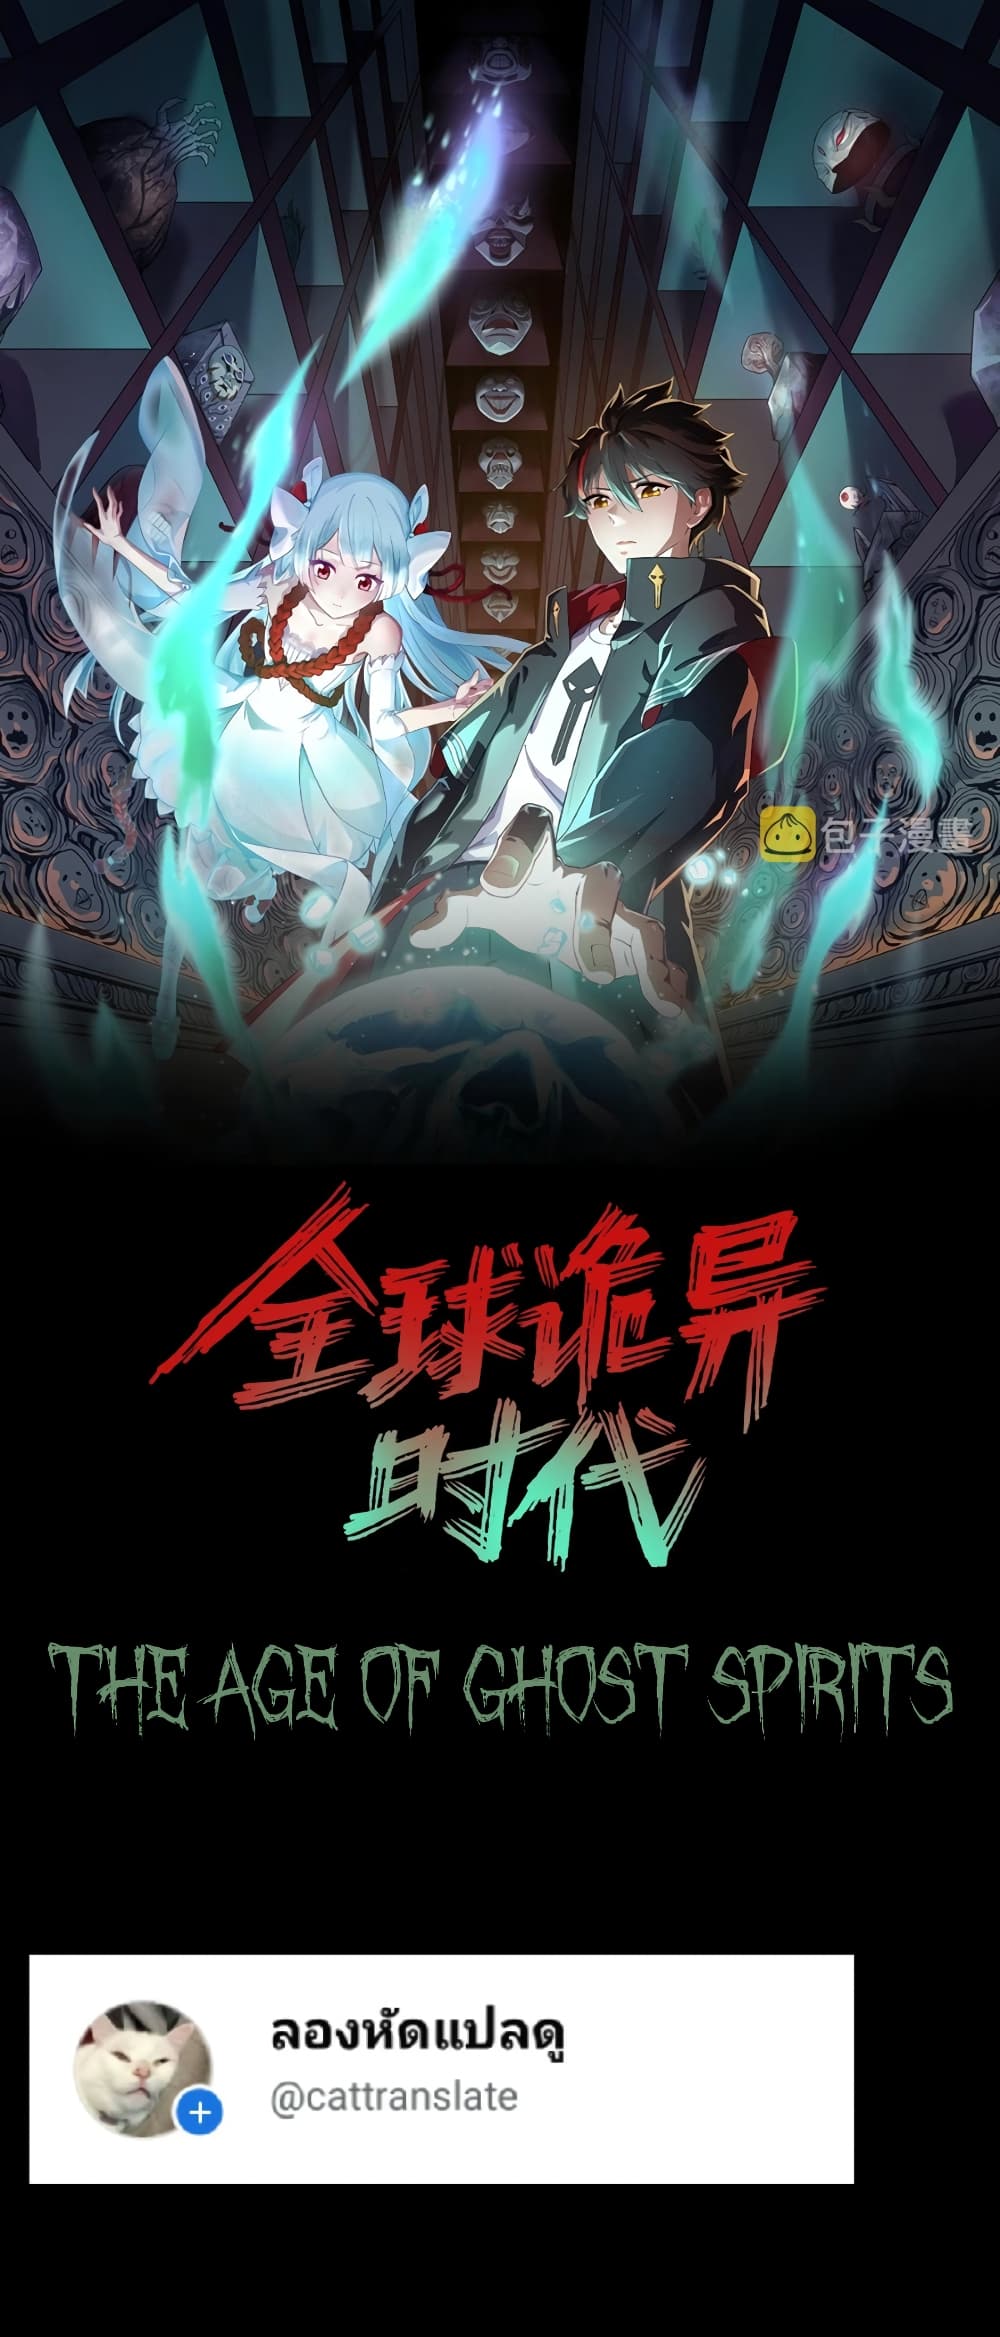 The Age of Ghost Spirits à¸à¸­à¸à¸à¸µà¹ 36 (1)